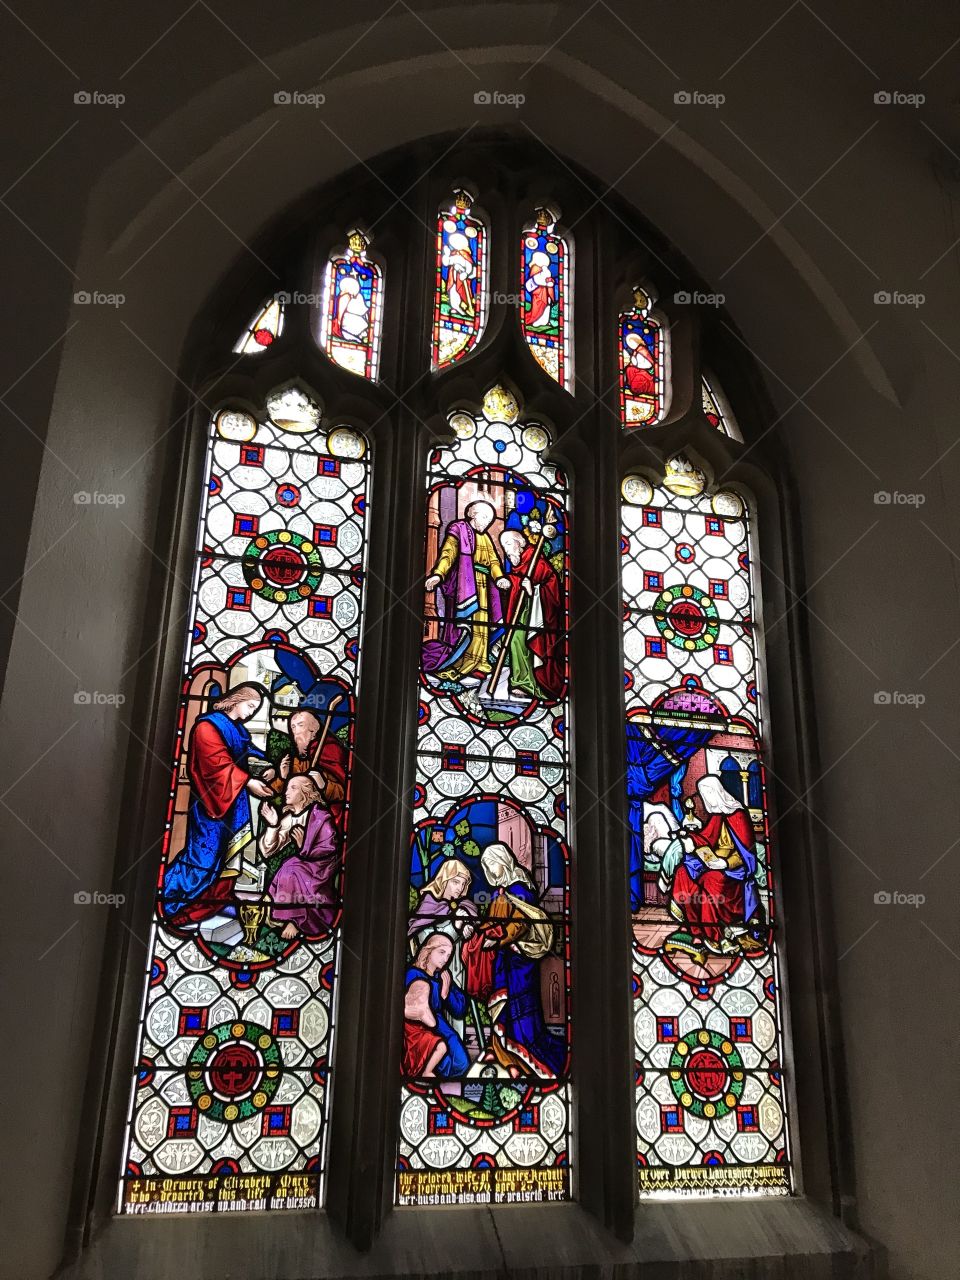 A most engaging stain glasses window to be found in All Saints Church, East Budleigh.